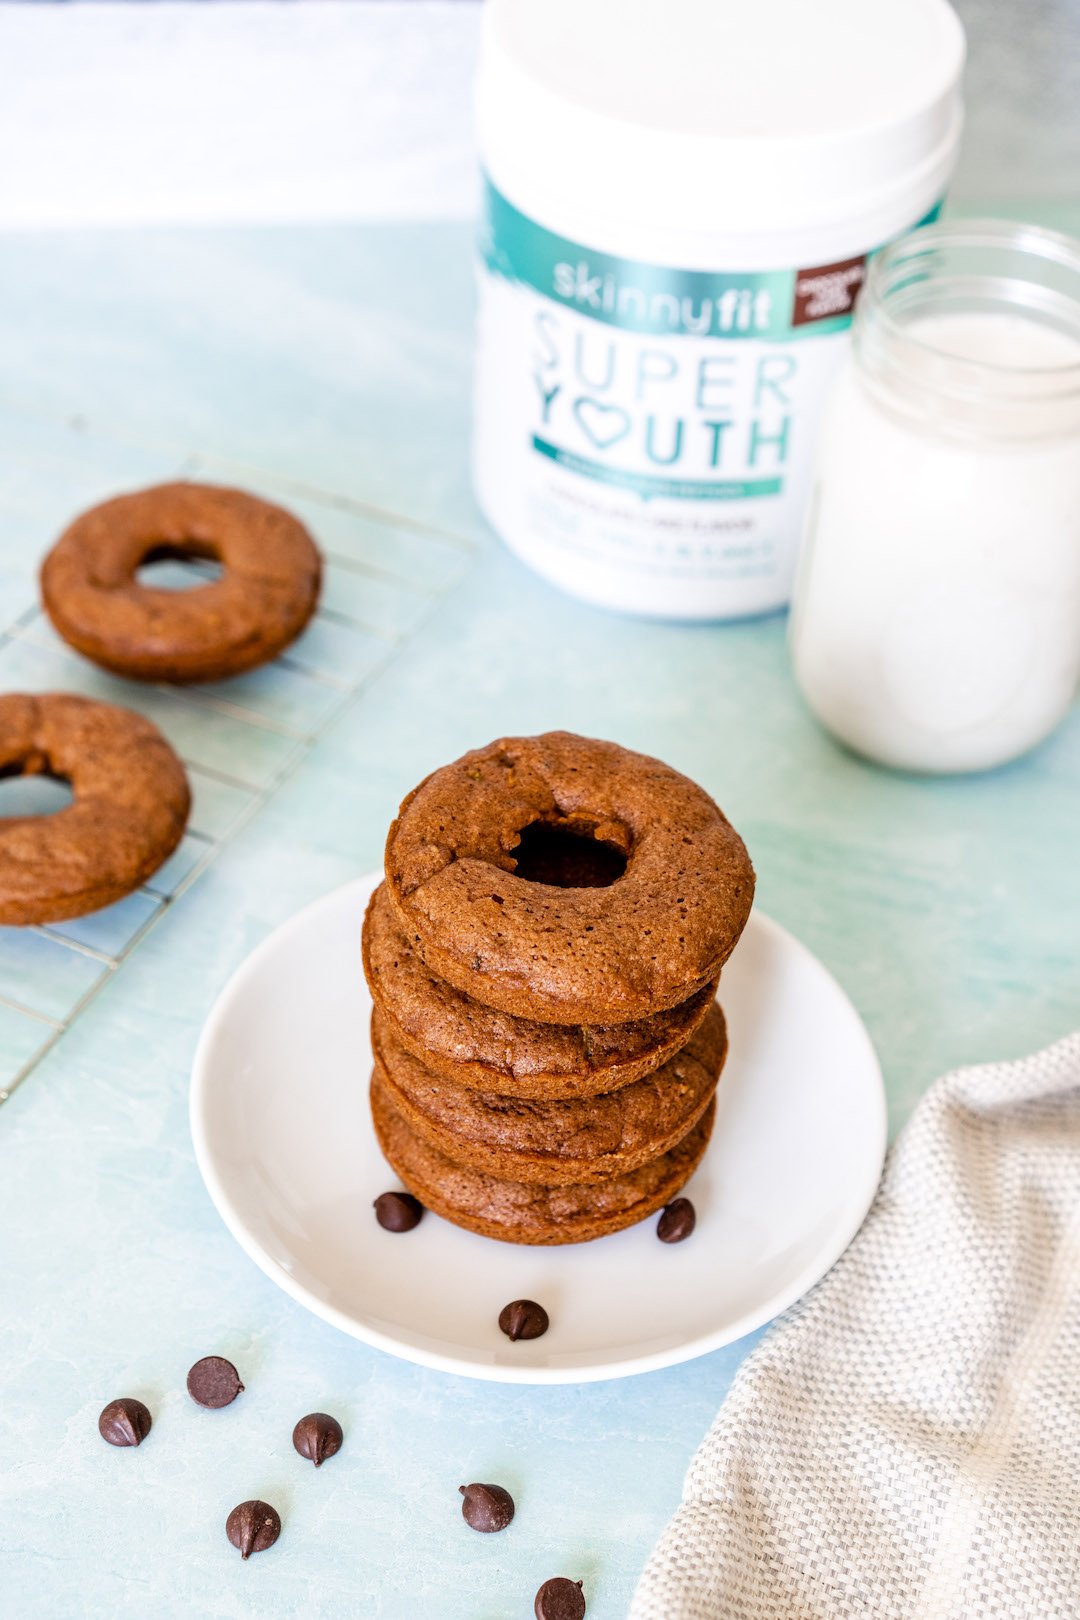 A stack of zucchini baked donuts on a plate with SkinnyFit Super Youth Collagen Peptides and a glass of milk